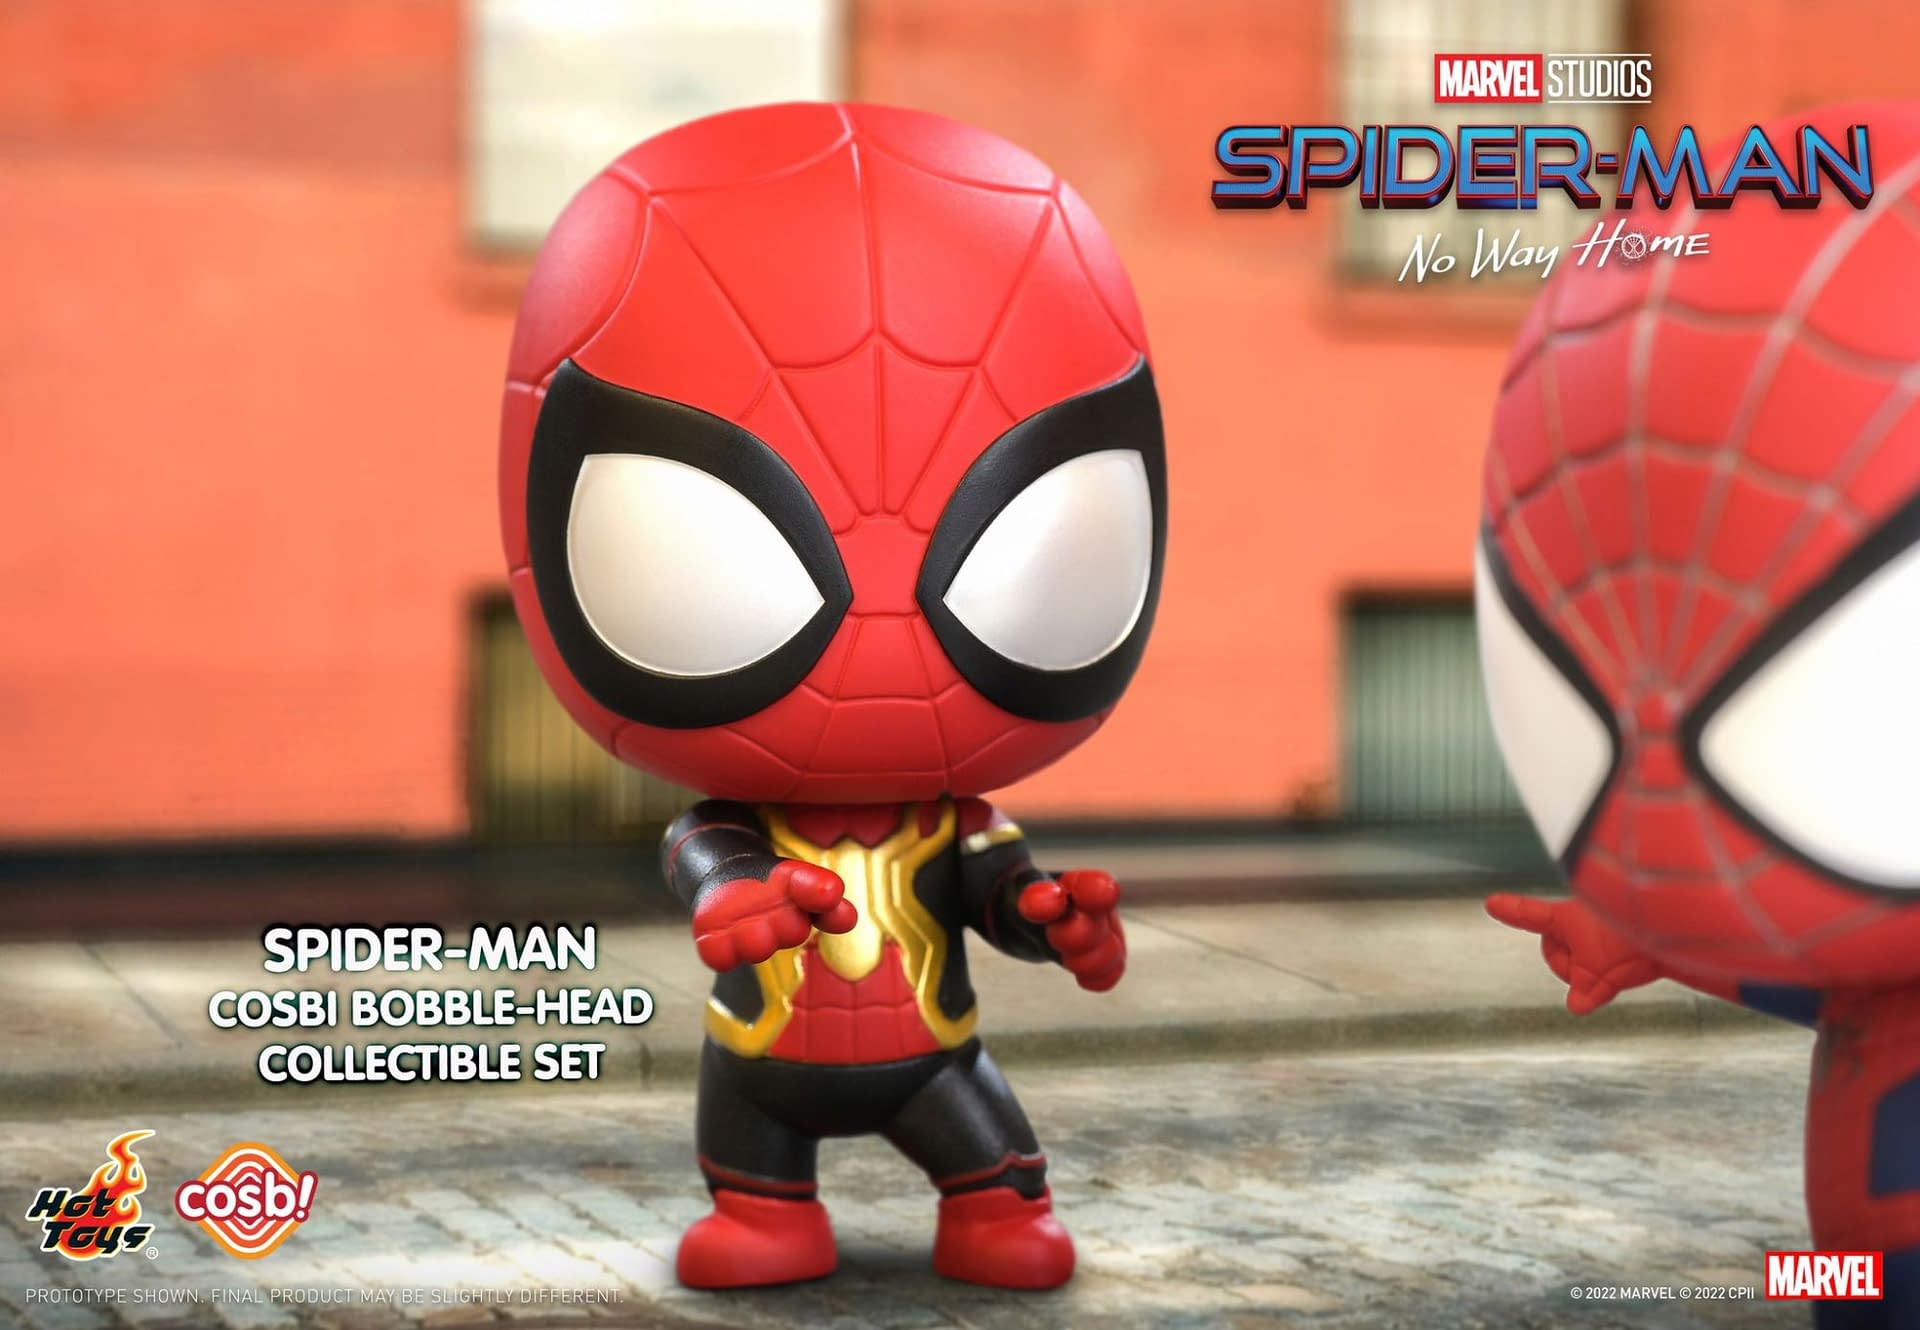 Spider-Man: No Way Home 3-Peters Meme Cosbi Set Hits Hot Toys